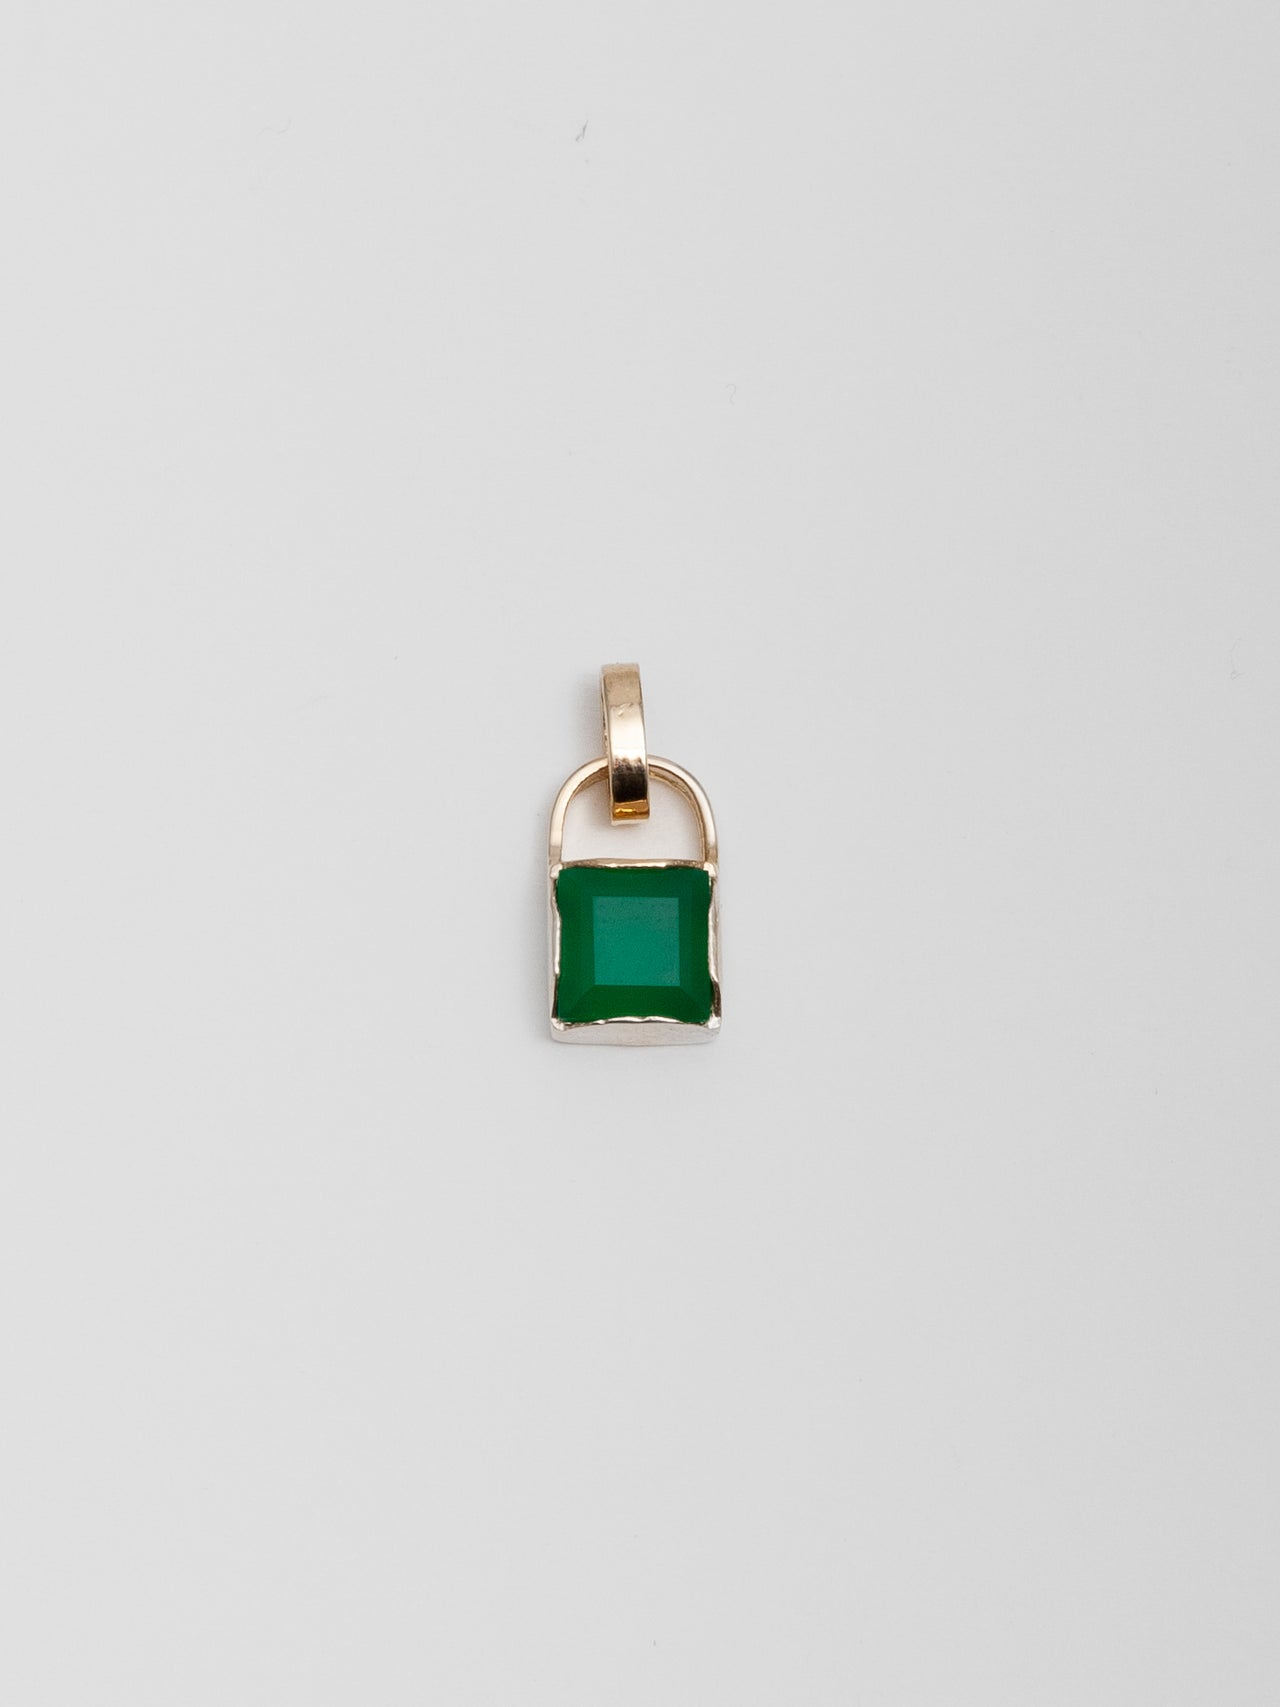 14kt Yellow Gold Green Onyx Padlock Pendant pictured on light grey background.